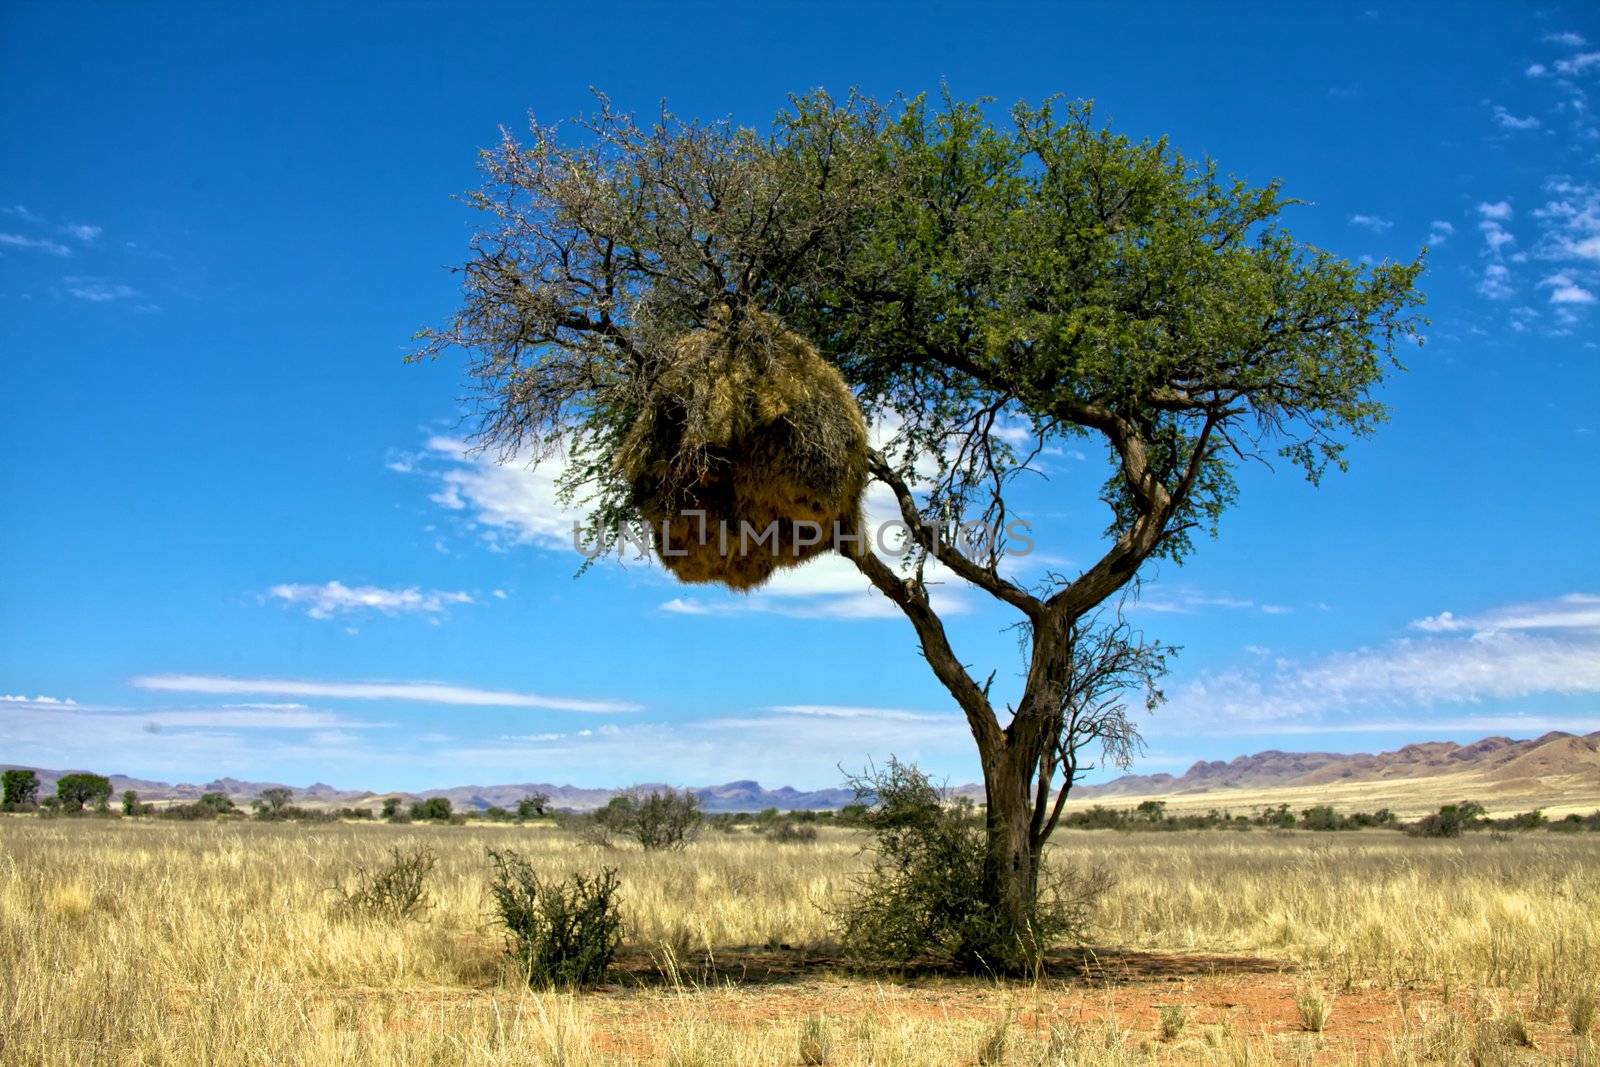 large sociable weaver's nest in a camelthorn tree at the namib naukluft national park namibia